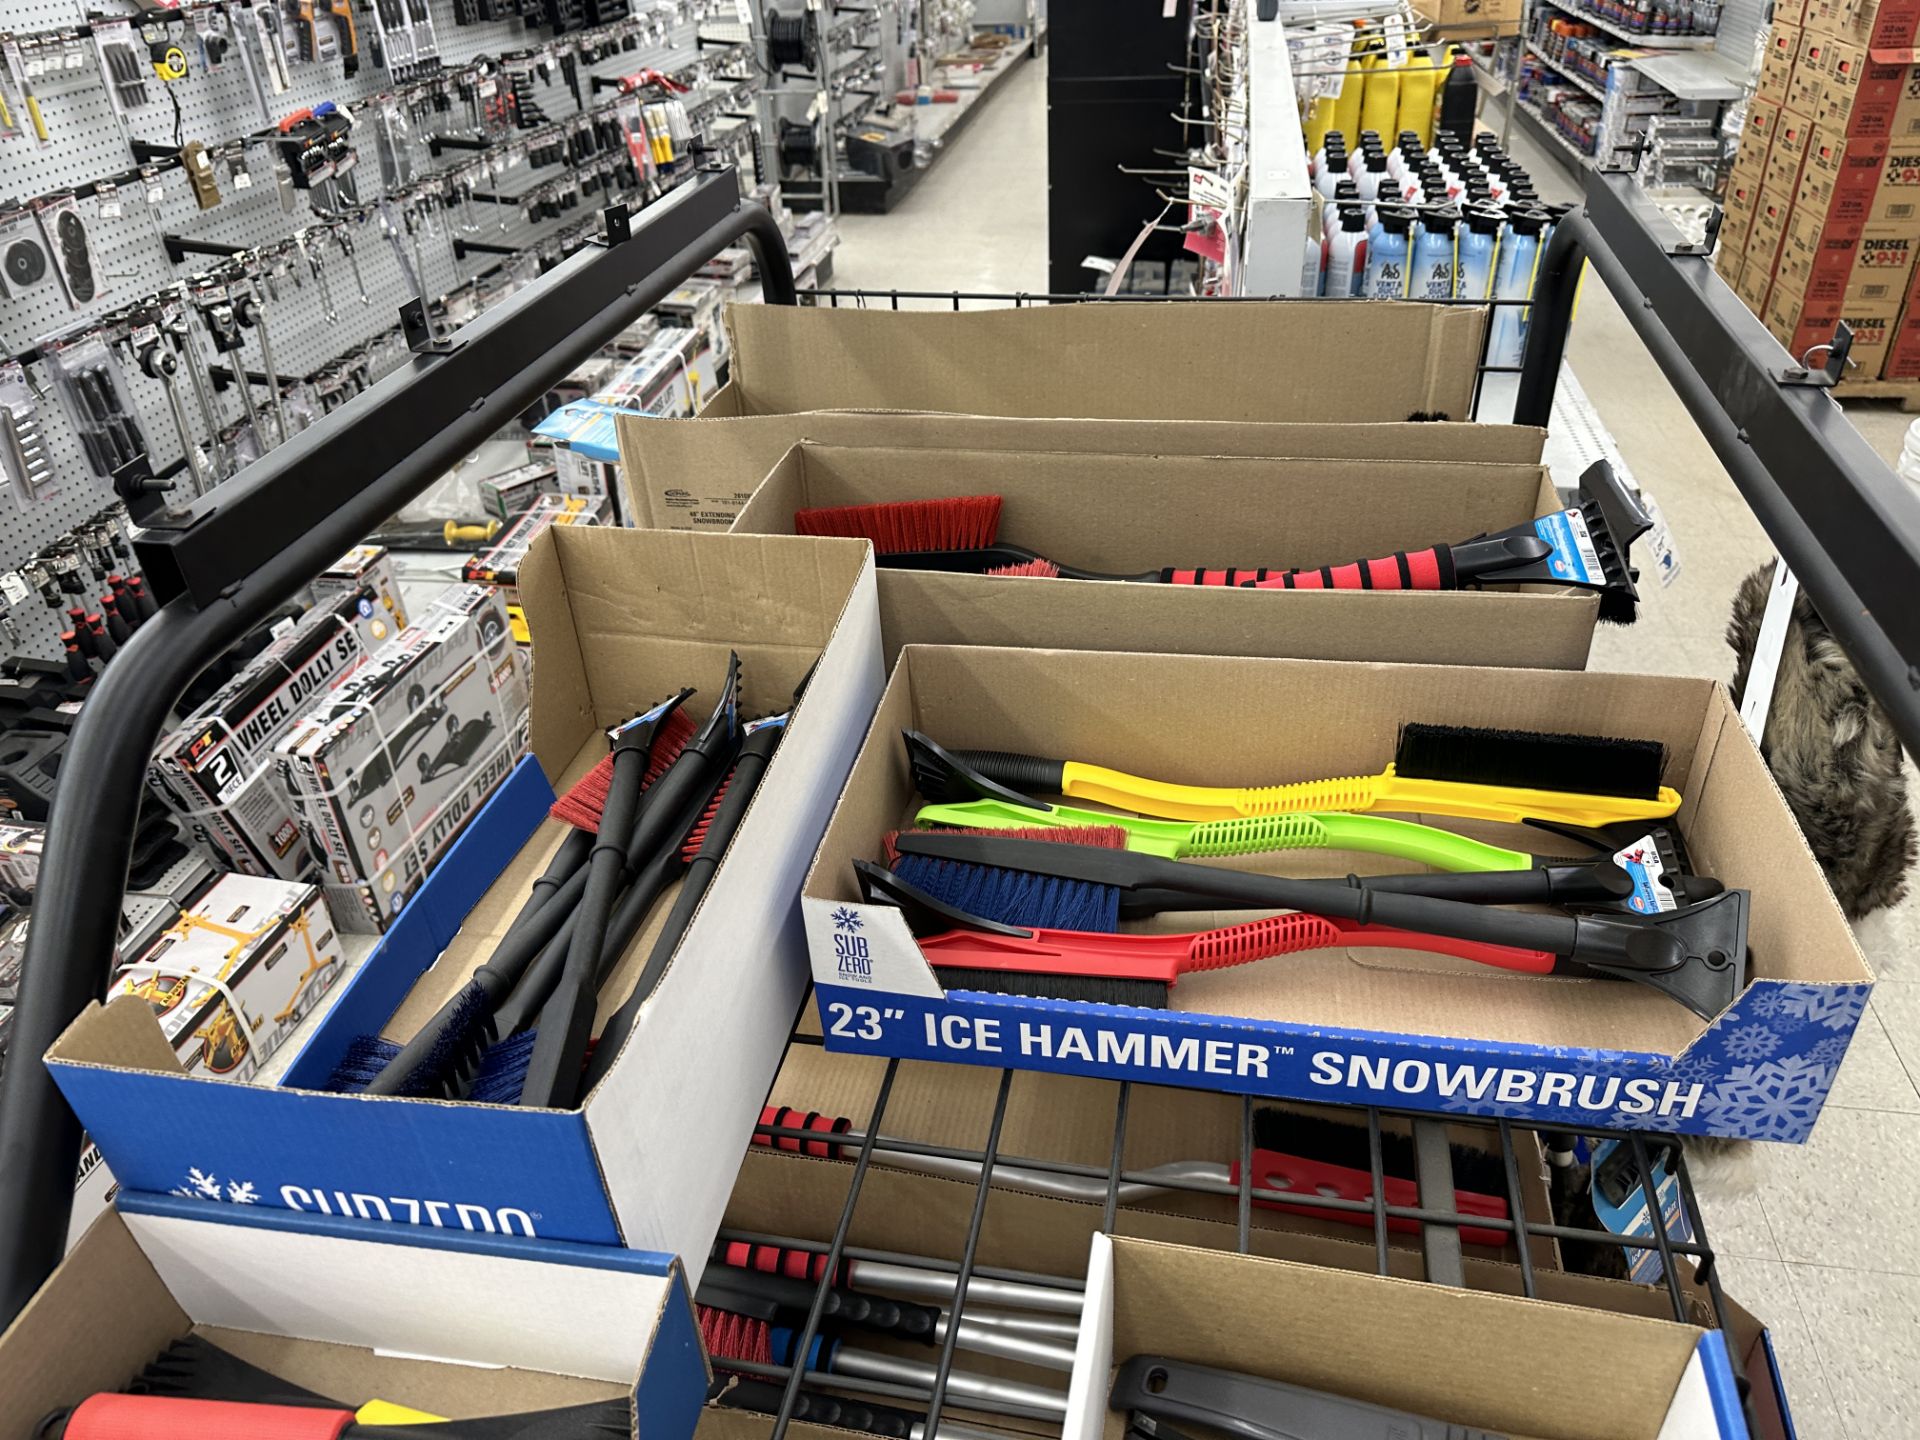 {LOT} Approx 60 Pieces of Hopkins Snow Brushes & Ice Scrapers & Shovels on Rack including Rack - Image 2 of 4